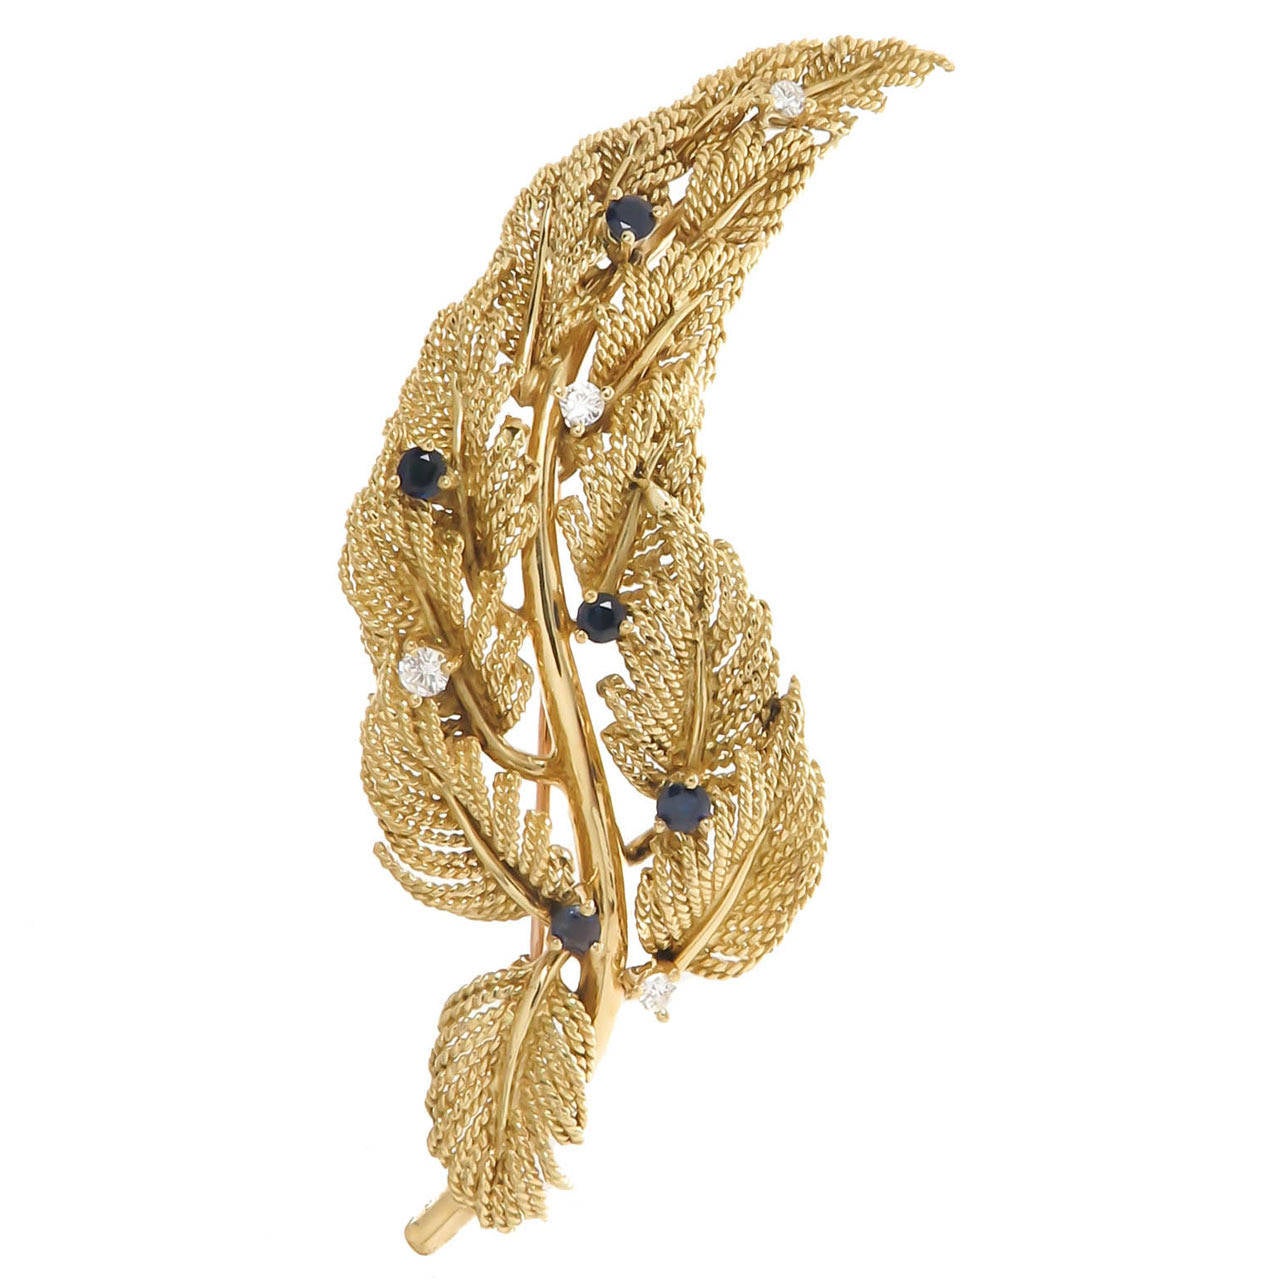 Tiffany & Co. Schlumberger Large Sapphire Diamond Gold Leaves Brooch